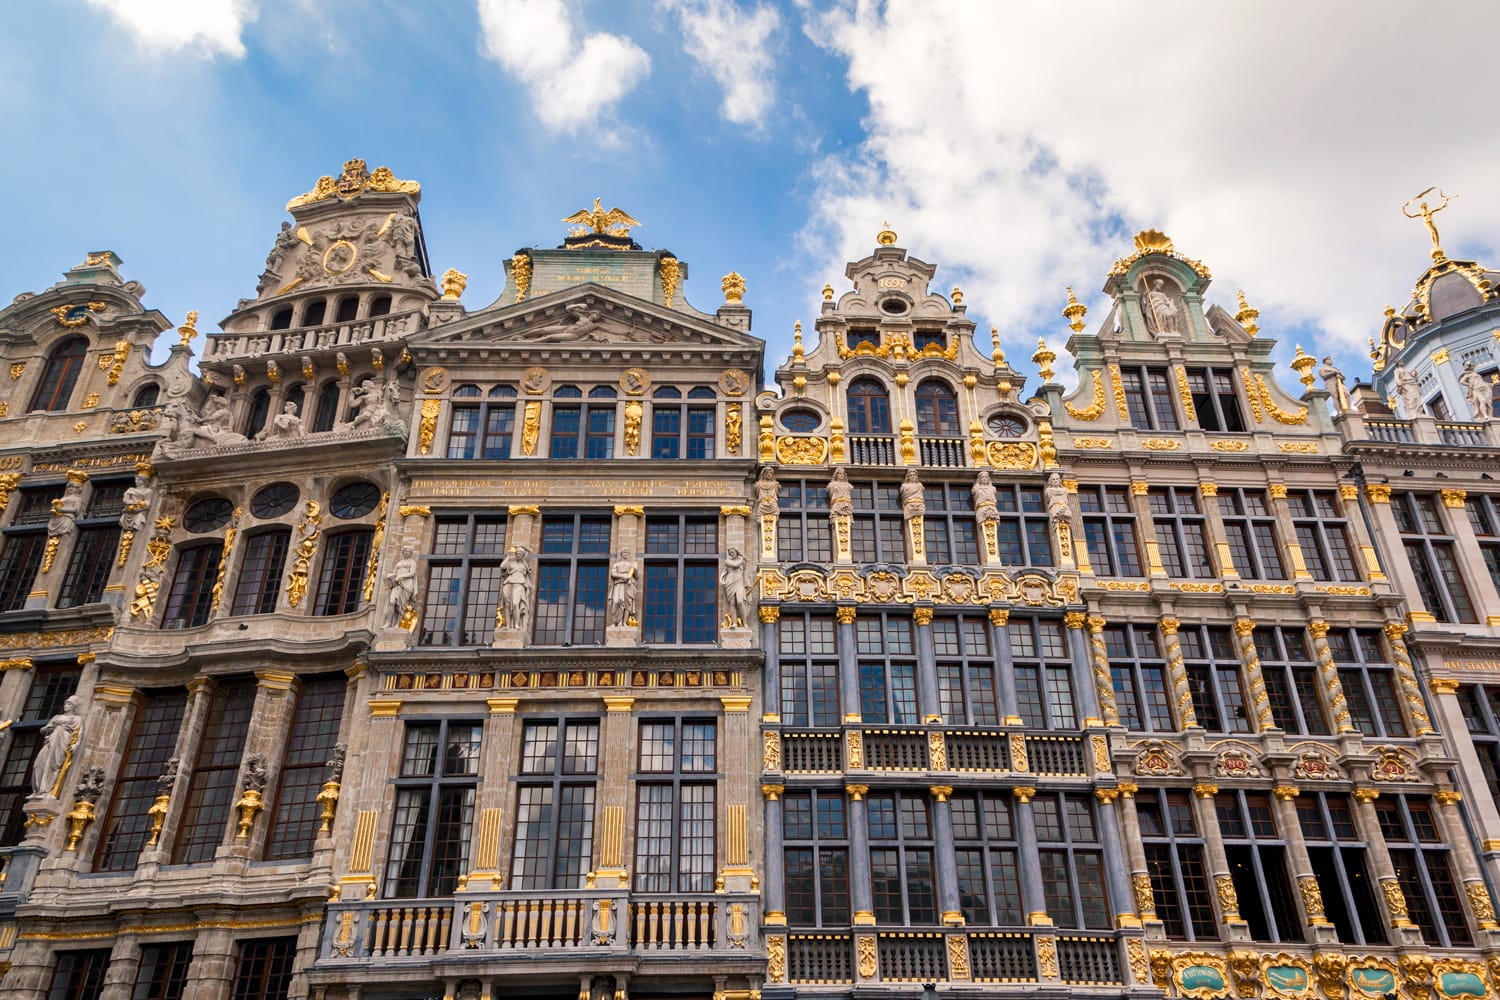 Buildings at the Grand place central square, old town of Brussels, Belgium